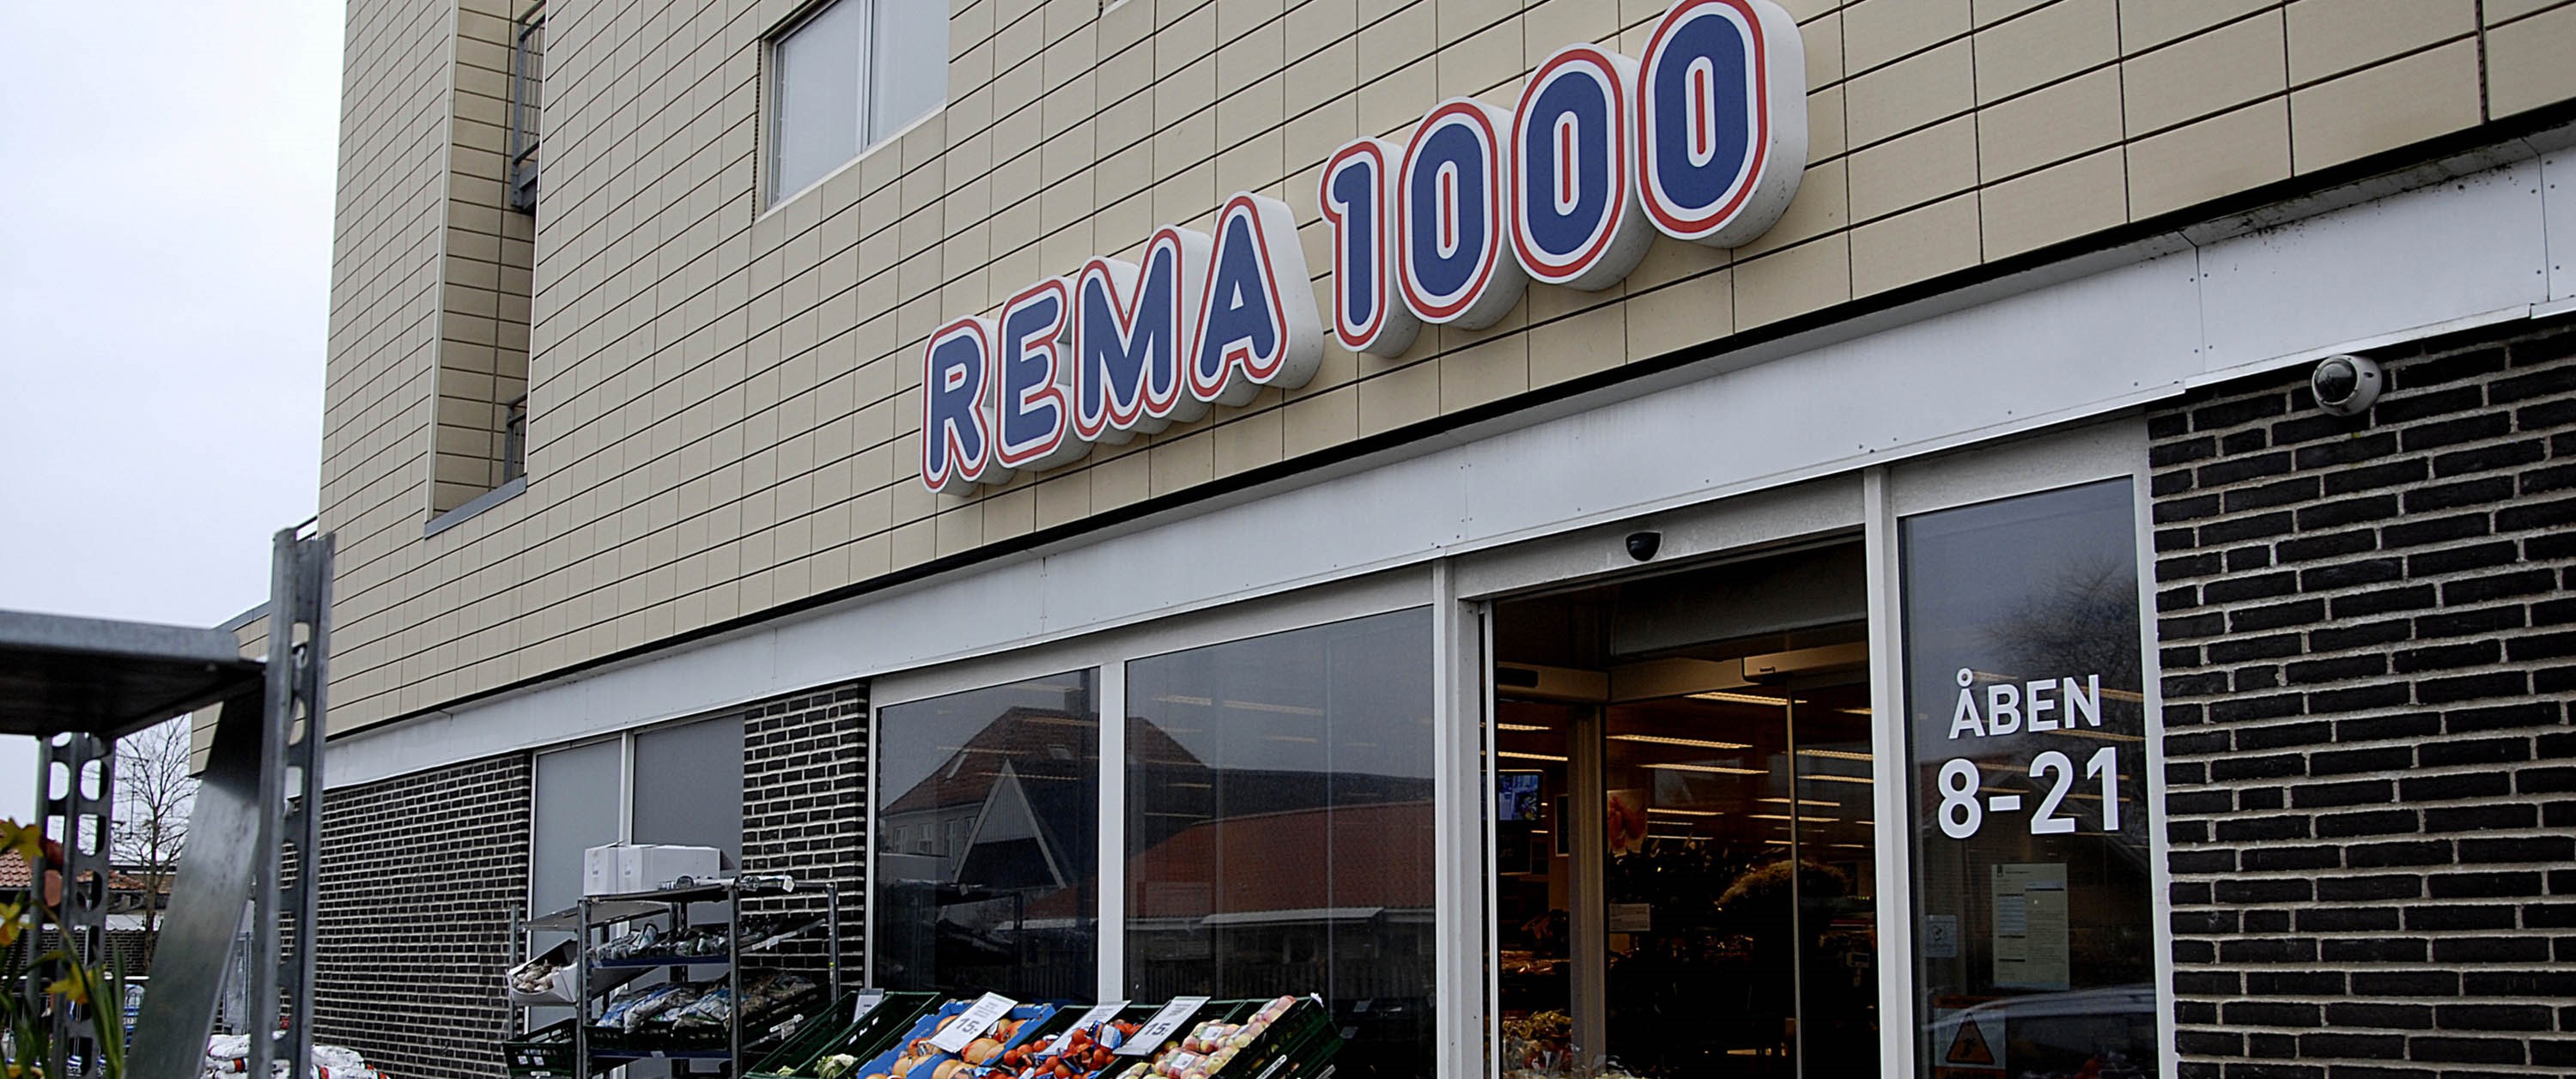 Rema 1000 store in Denmark. Photo: Deanspictures/Dreamstime